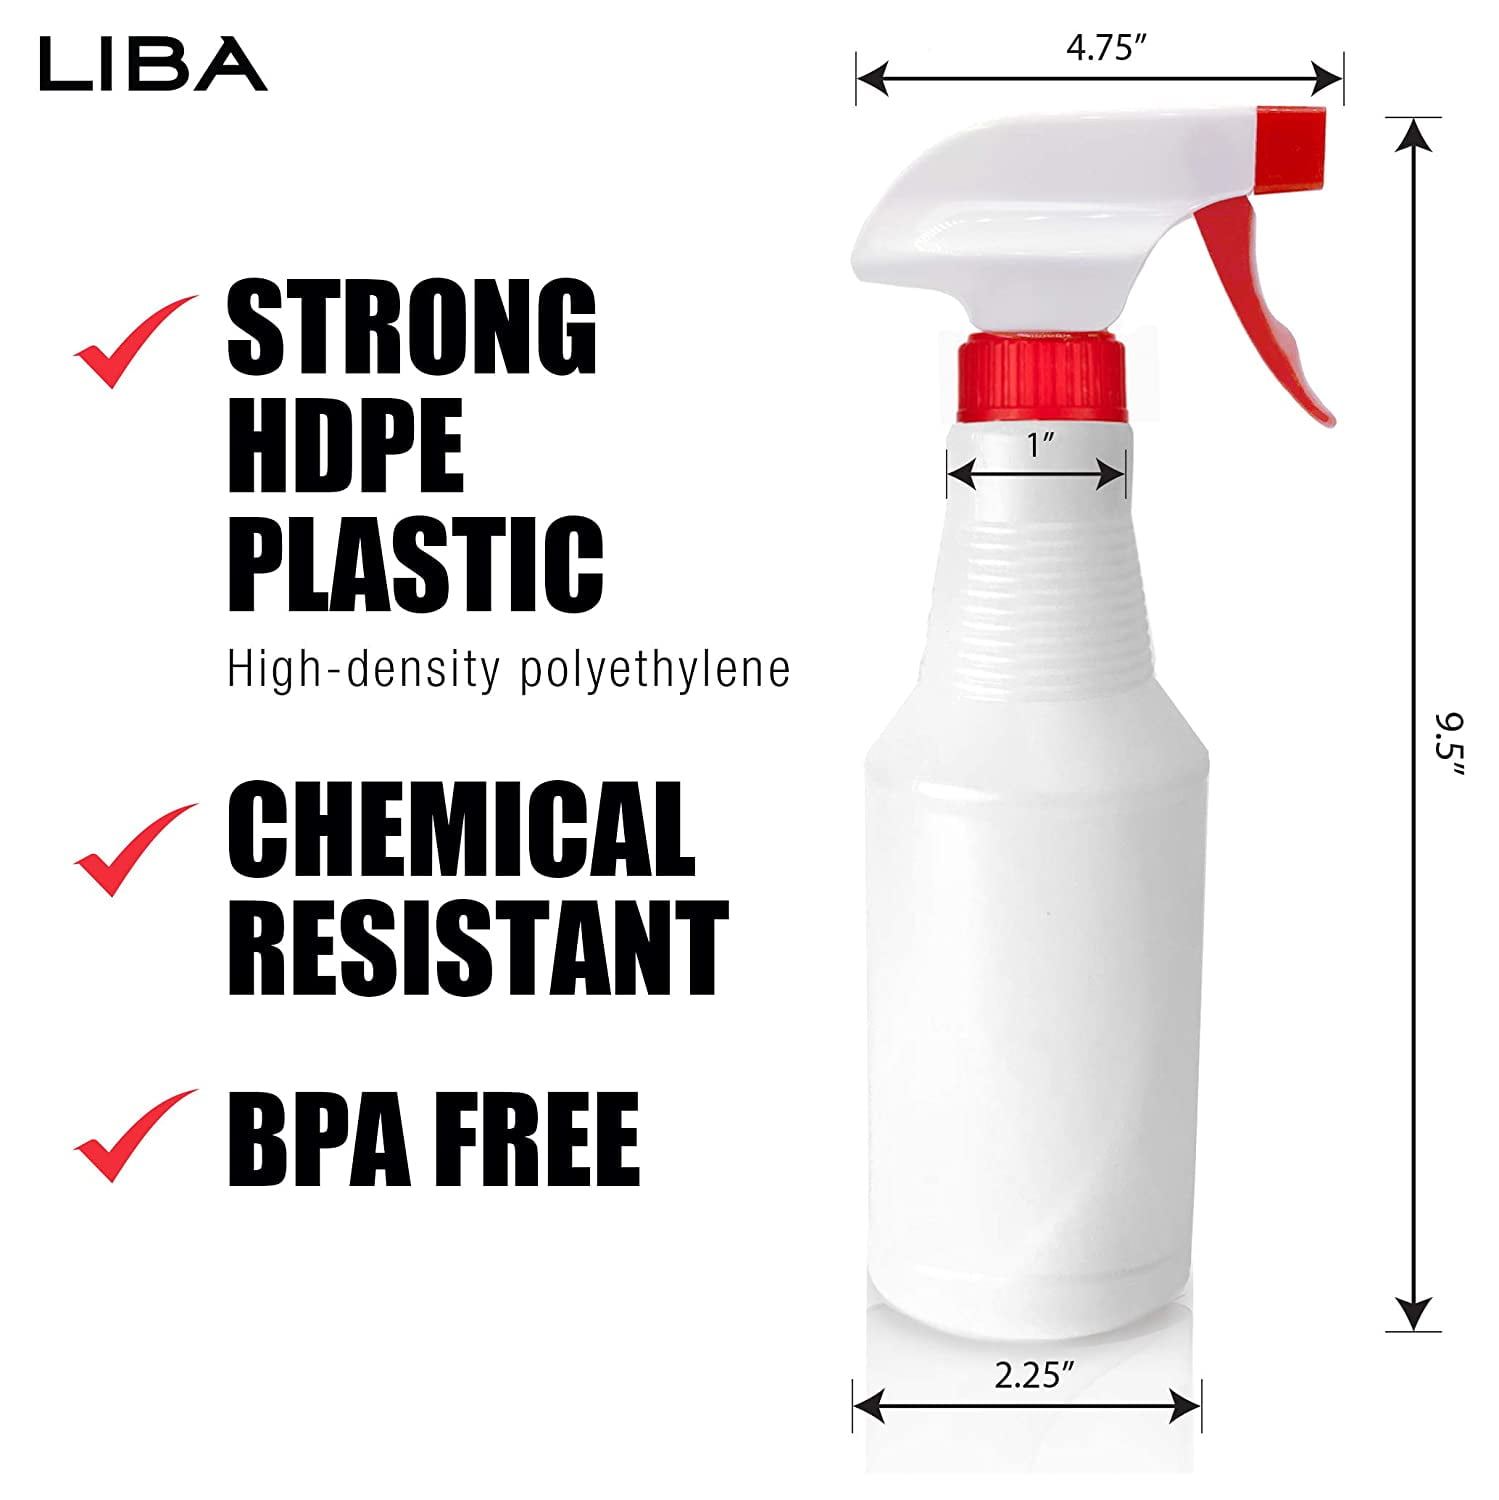  Spray Bottle 16 Ounce 4-Pack - Heavy-Duty, BPA-Free Plastic  Spray Bottles For Cleaning, Gardening, Auto Detailing - Leak-Proof,  Adjustable Nozzle Mist Or Soak, Chemical Resistant, Made In USA